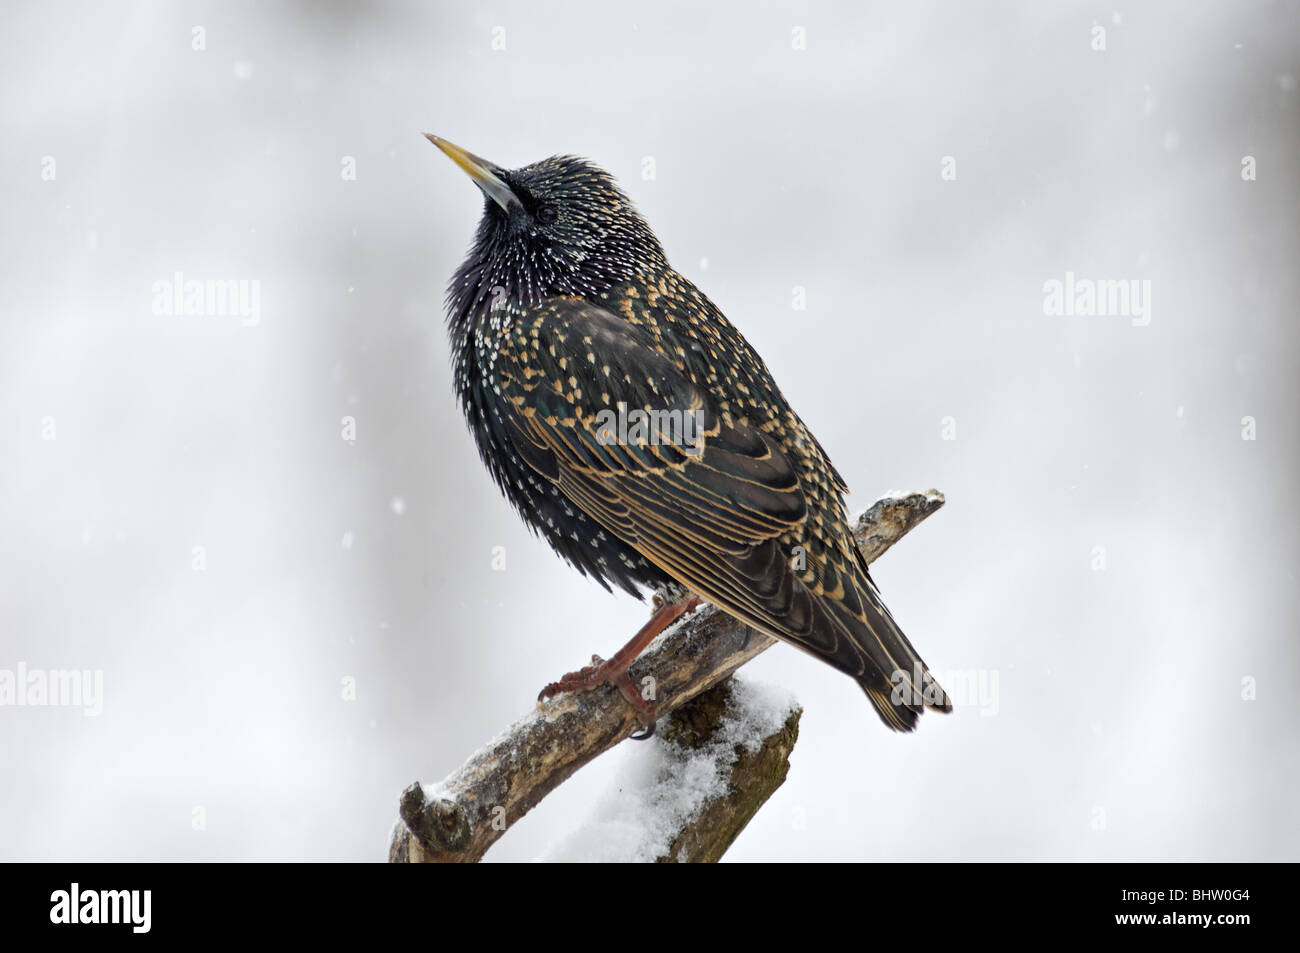 European Starling Perched on Branch in Snow Stock Photo